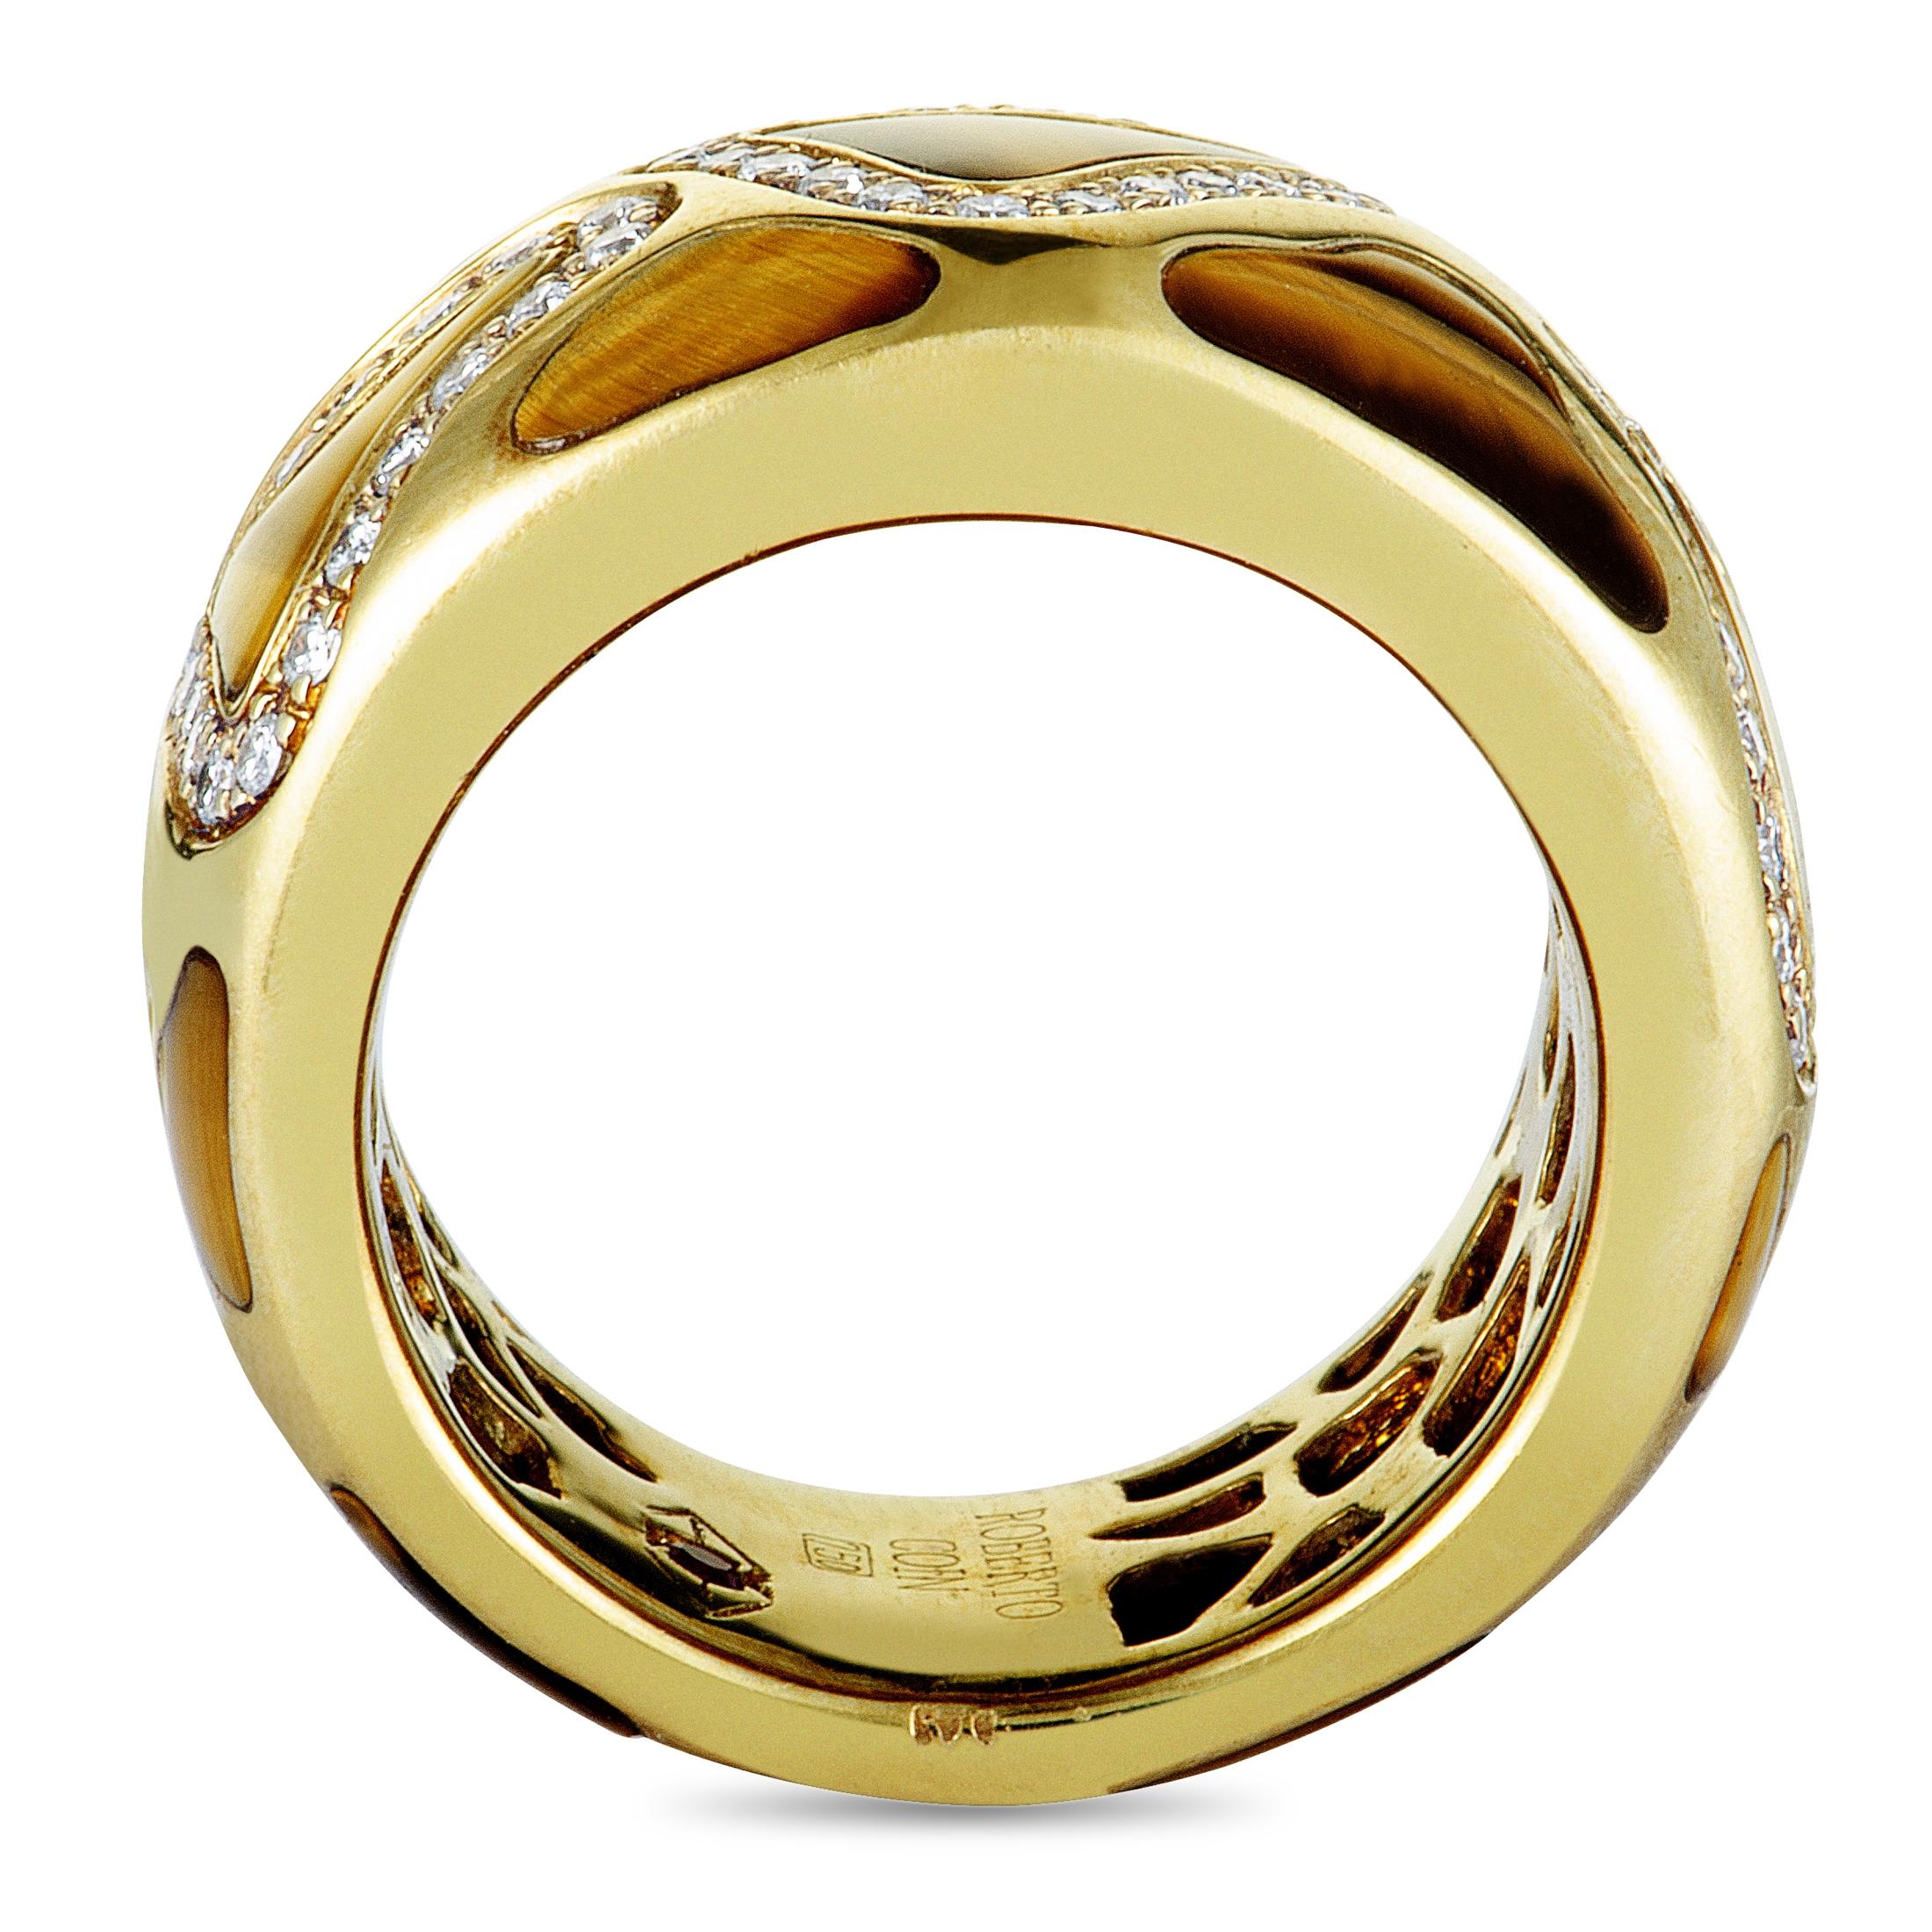 The fashionable décor of this eye-catching Roberto Coin ring is inspired by the characteristic spots that giraffes have on their fur. This decorative motif is presented in enticing tiger’s eye stones against the luxuriously radiant 18K yellow gold,